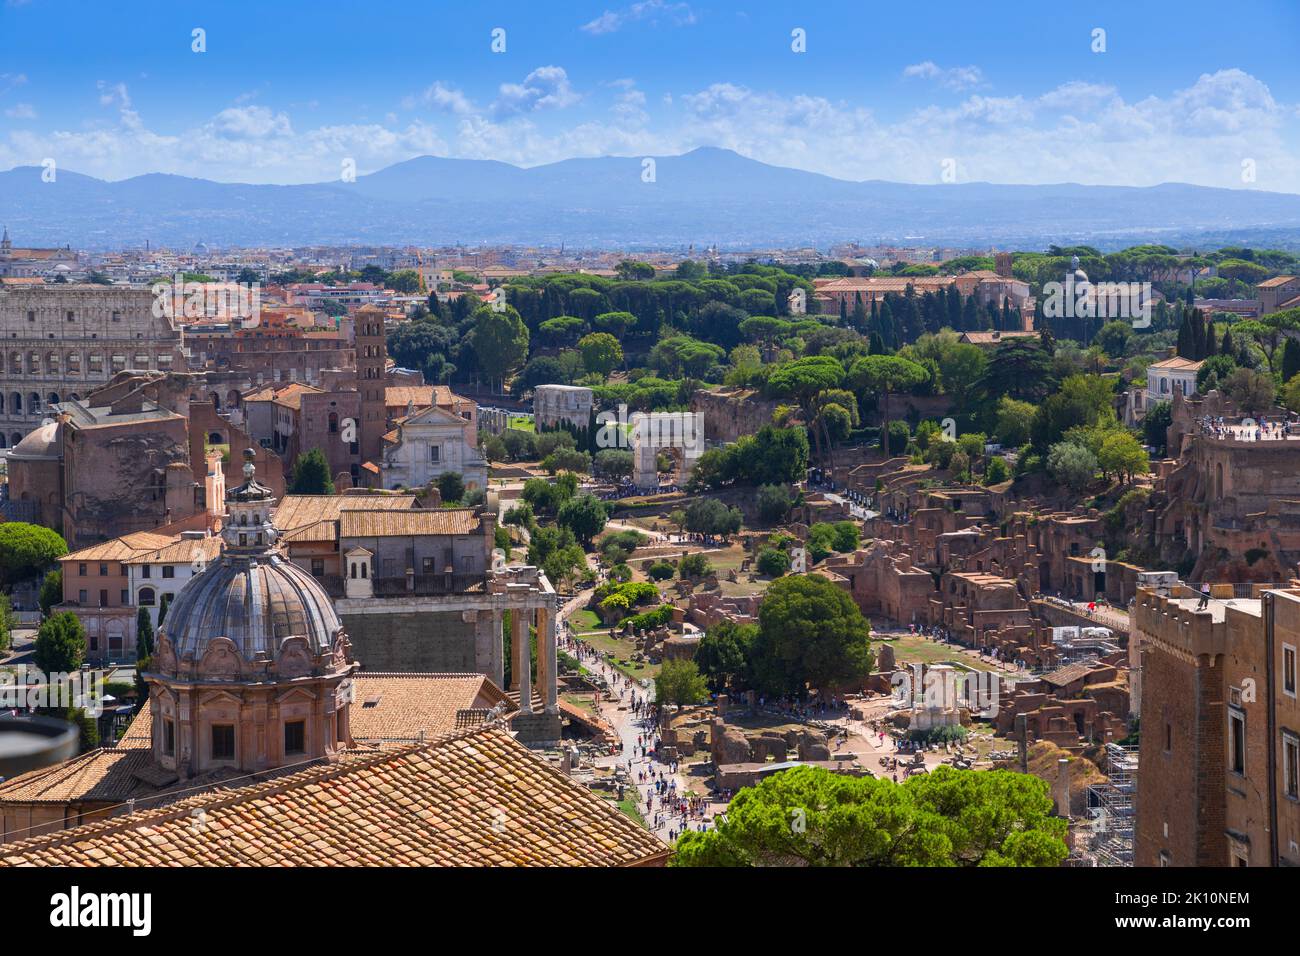 Rome skyline: Colosseum and Imperial Forum. Stock Photo